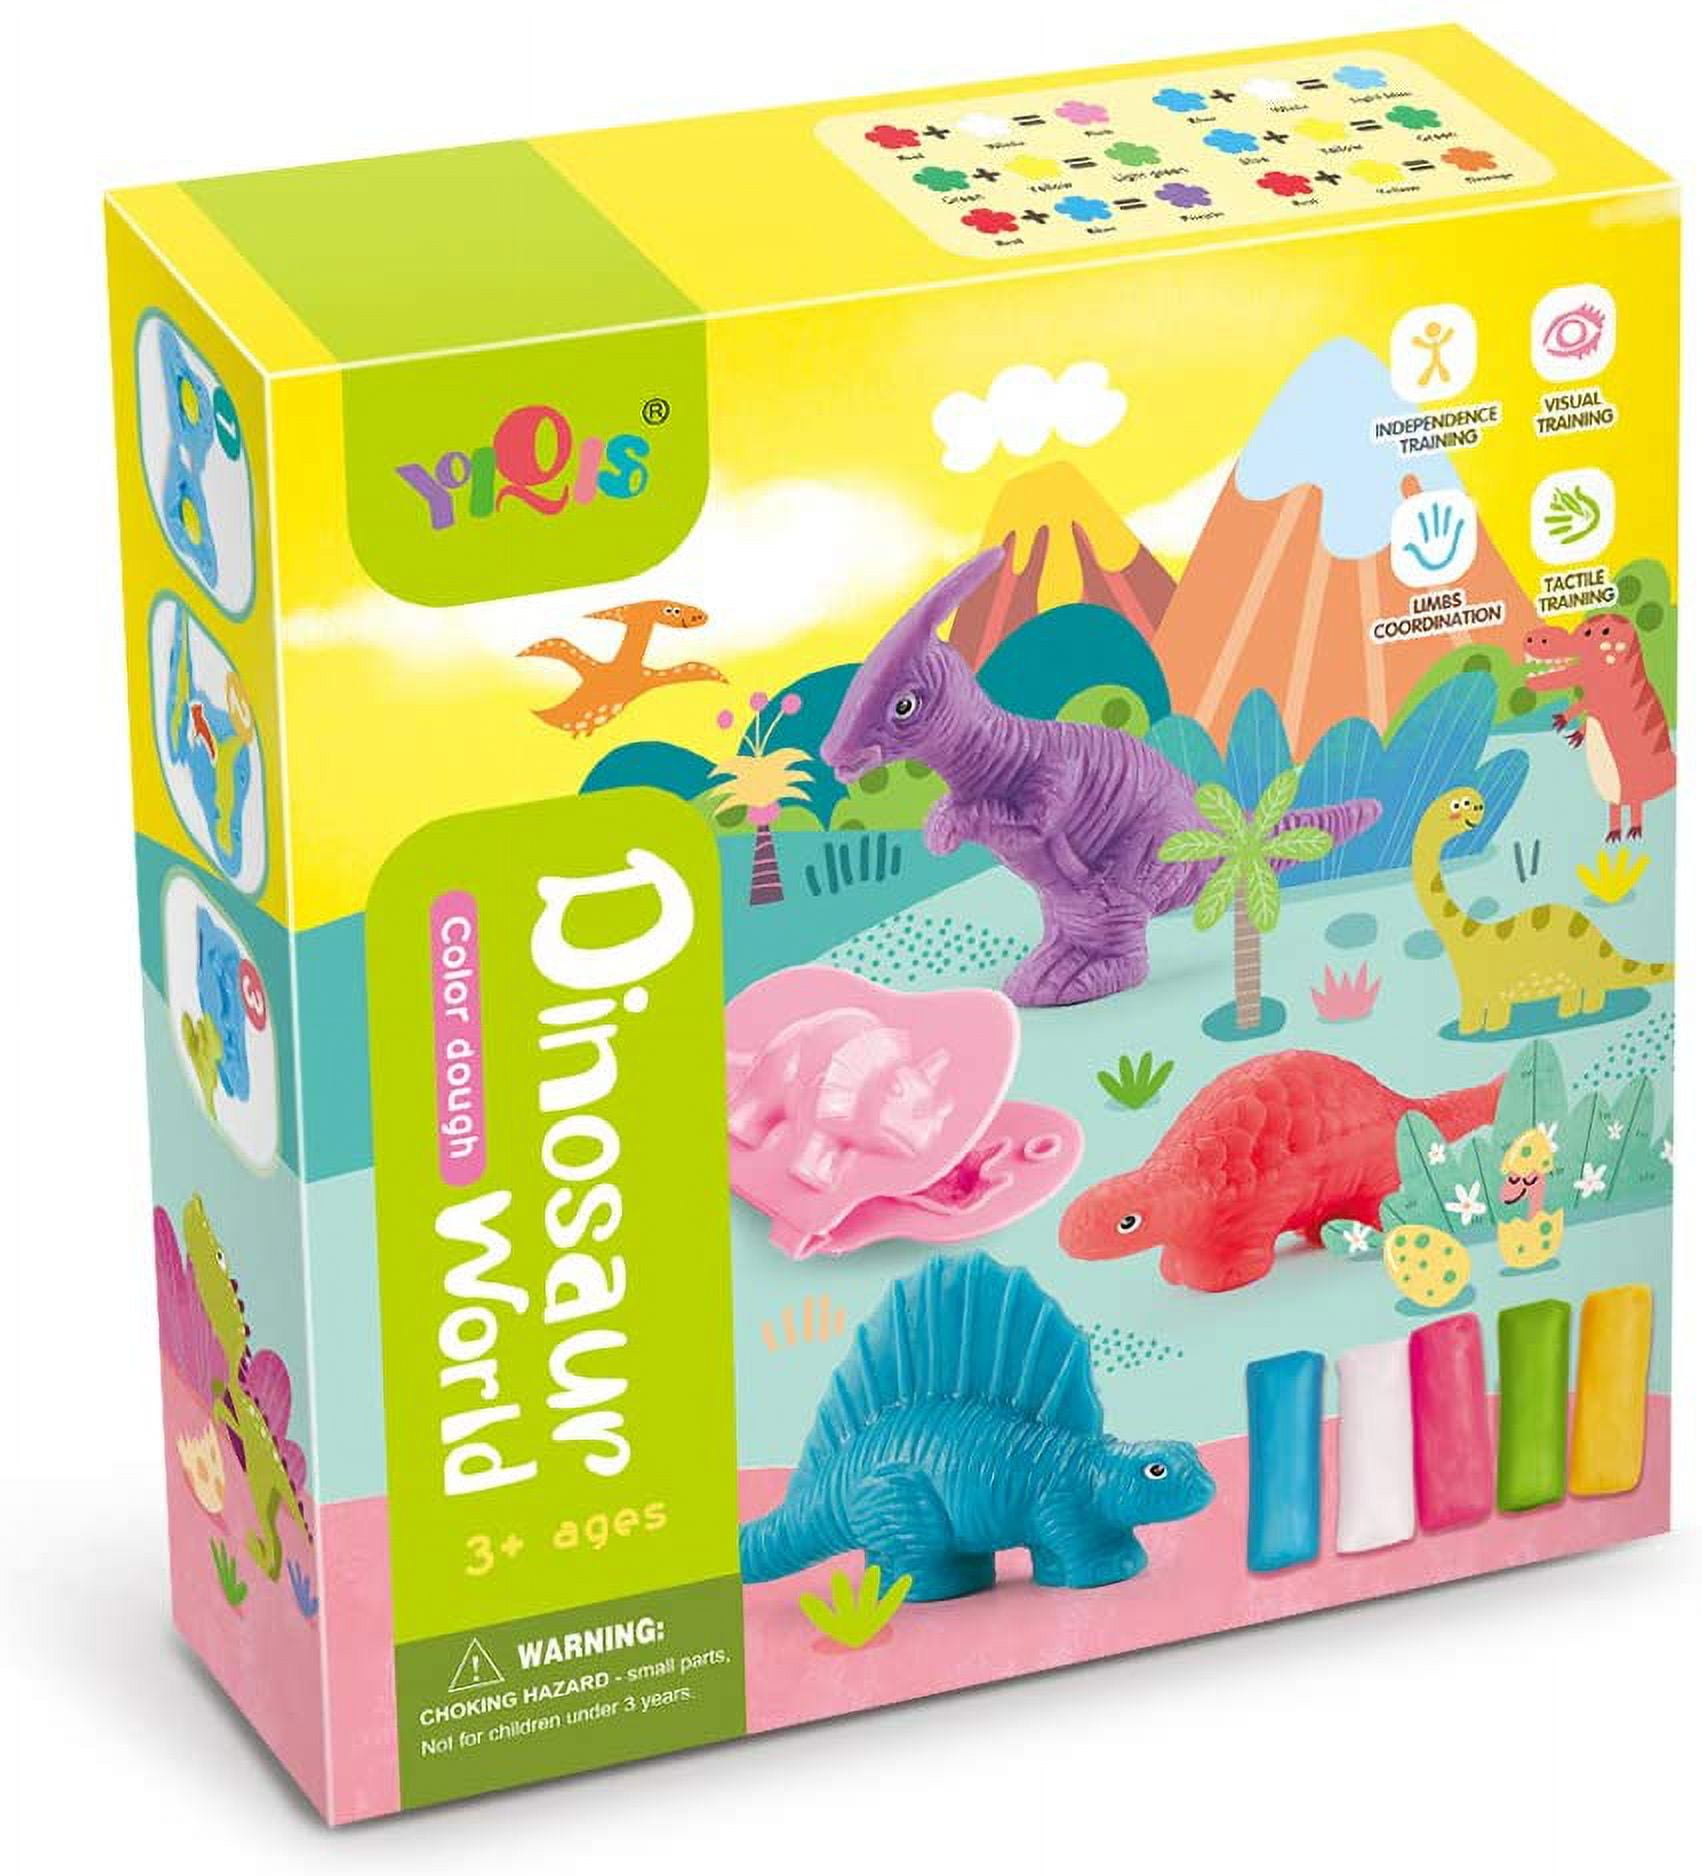  Dinosaur Play Dough Sets for Toddlers, Play Dough Tool Kit for  Kids,36 Pcs Play Dough Accessories Dinosaur Playset Toys for Kids 3-5 (24  Pack Dough) : Toys & Games